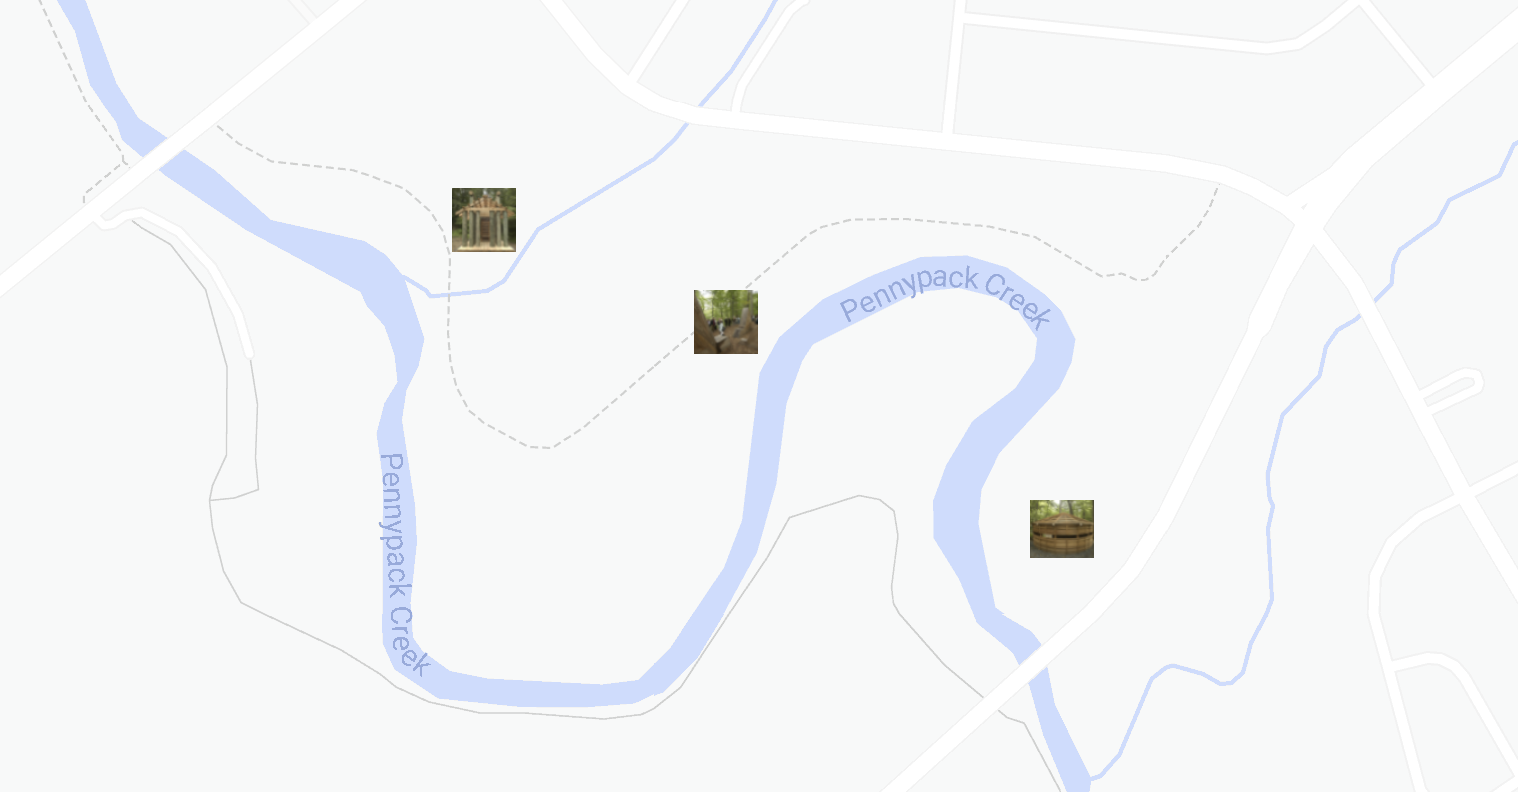 screenshot of Google map showing location of "Embodying Thoreau" public art structures